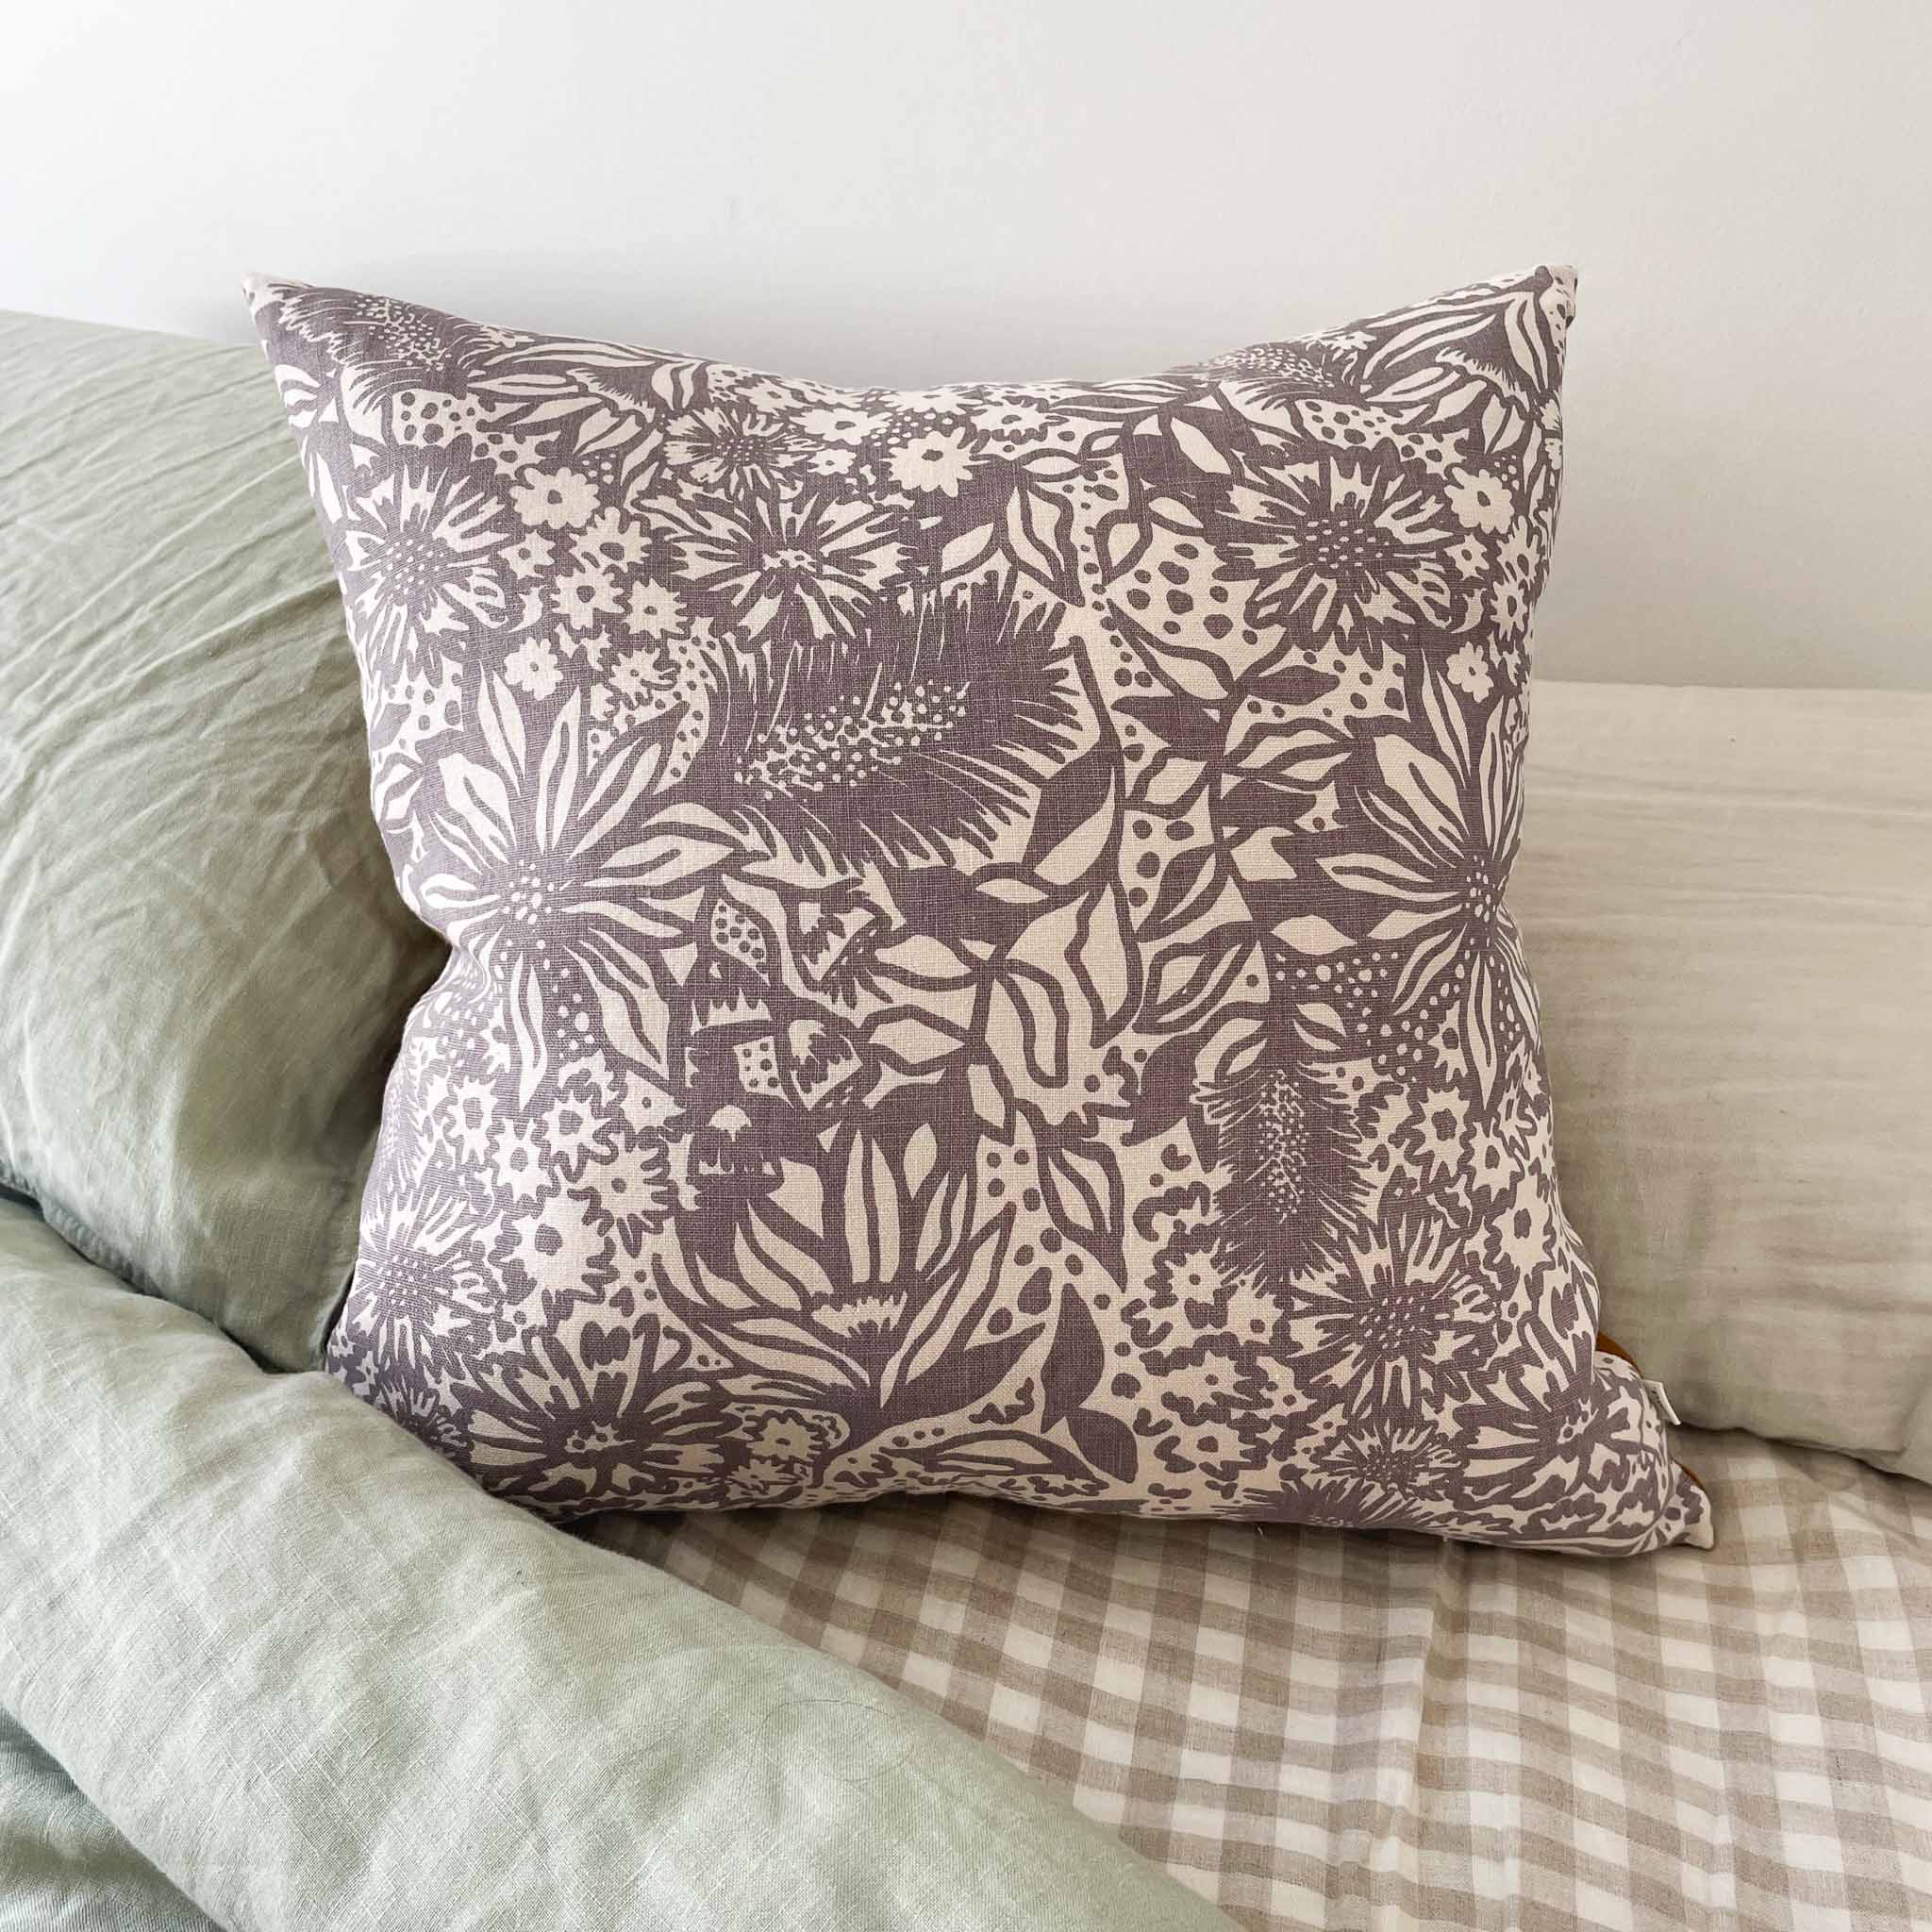 Cushion Cover - Flower Field in Dusty Lilac